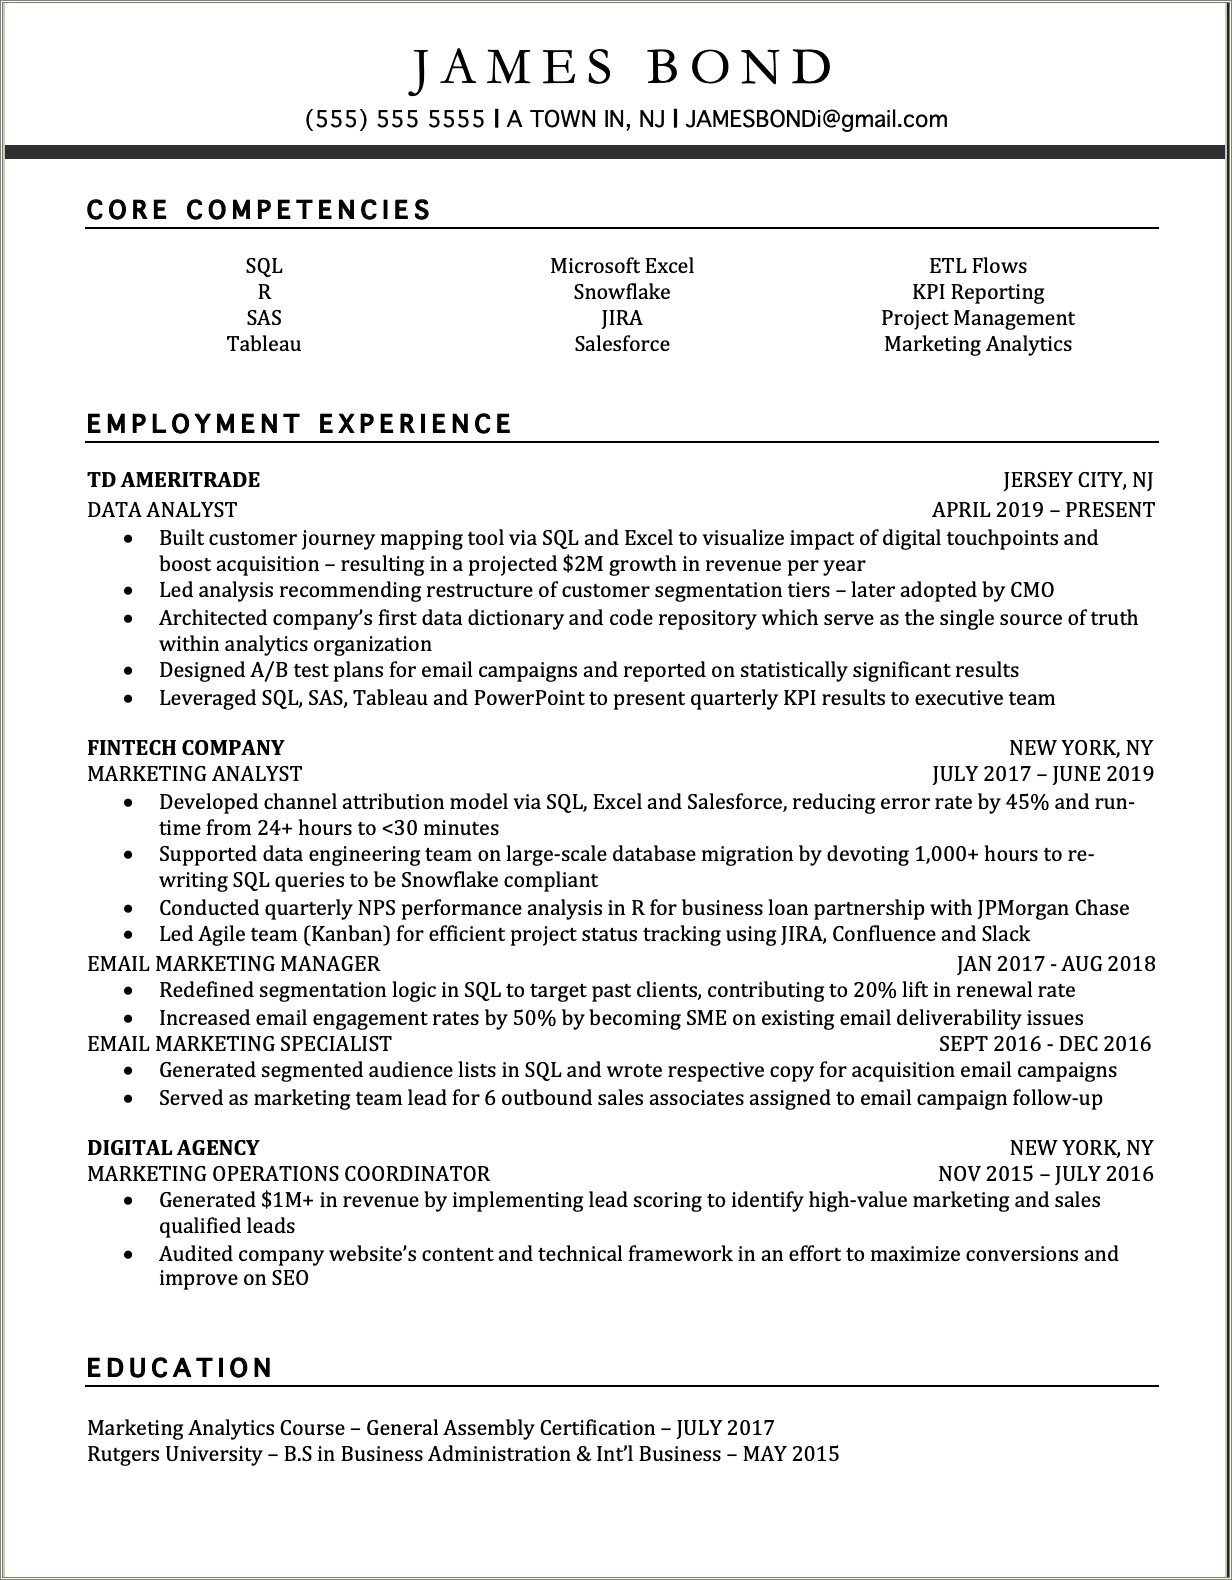 Resume With Different Job Experience